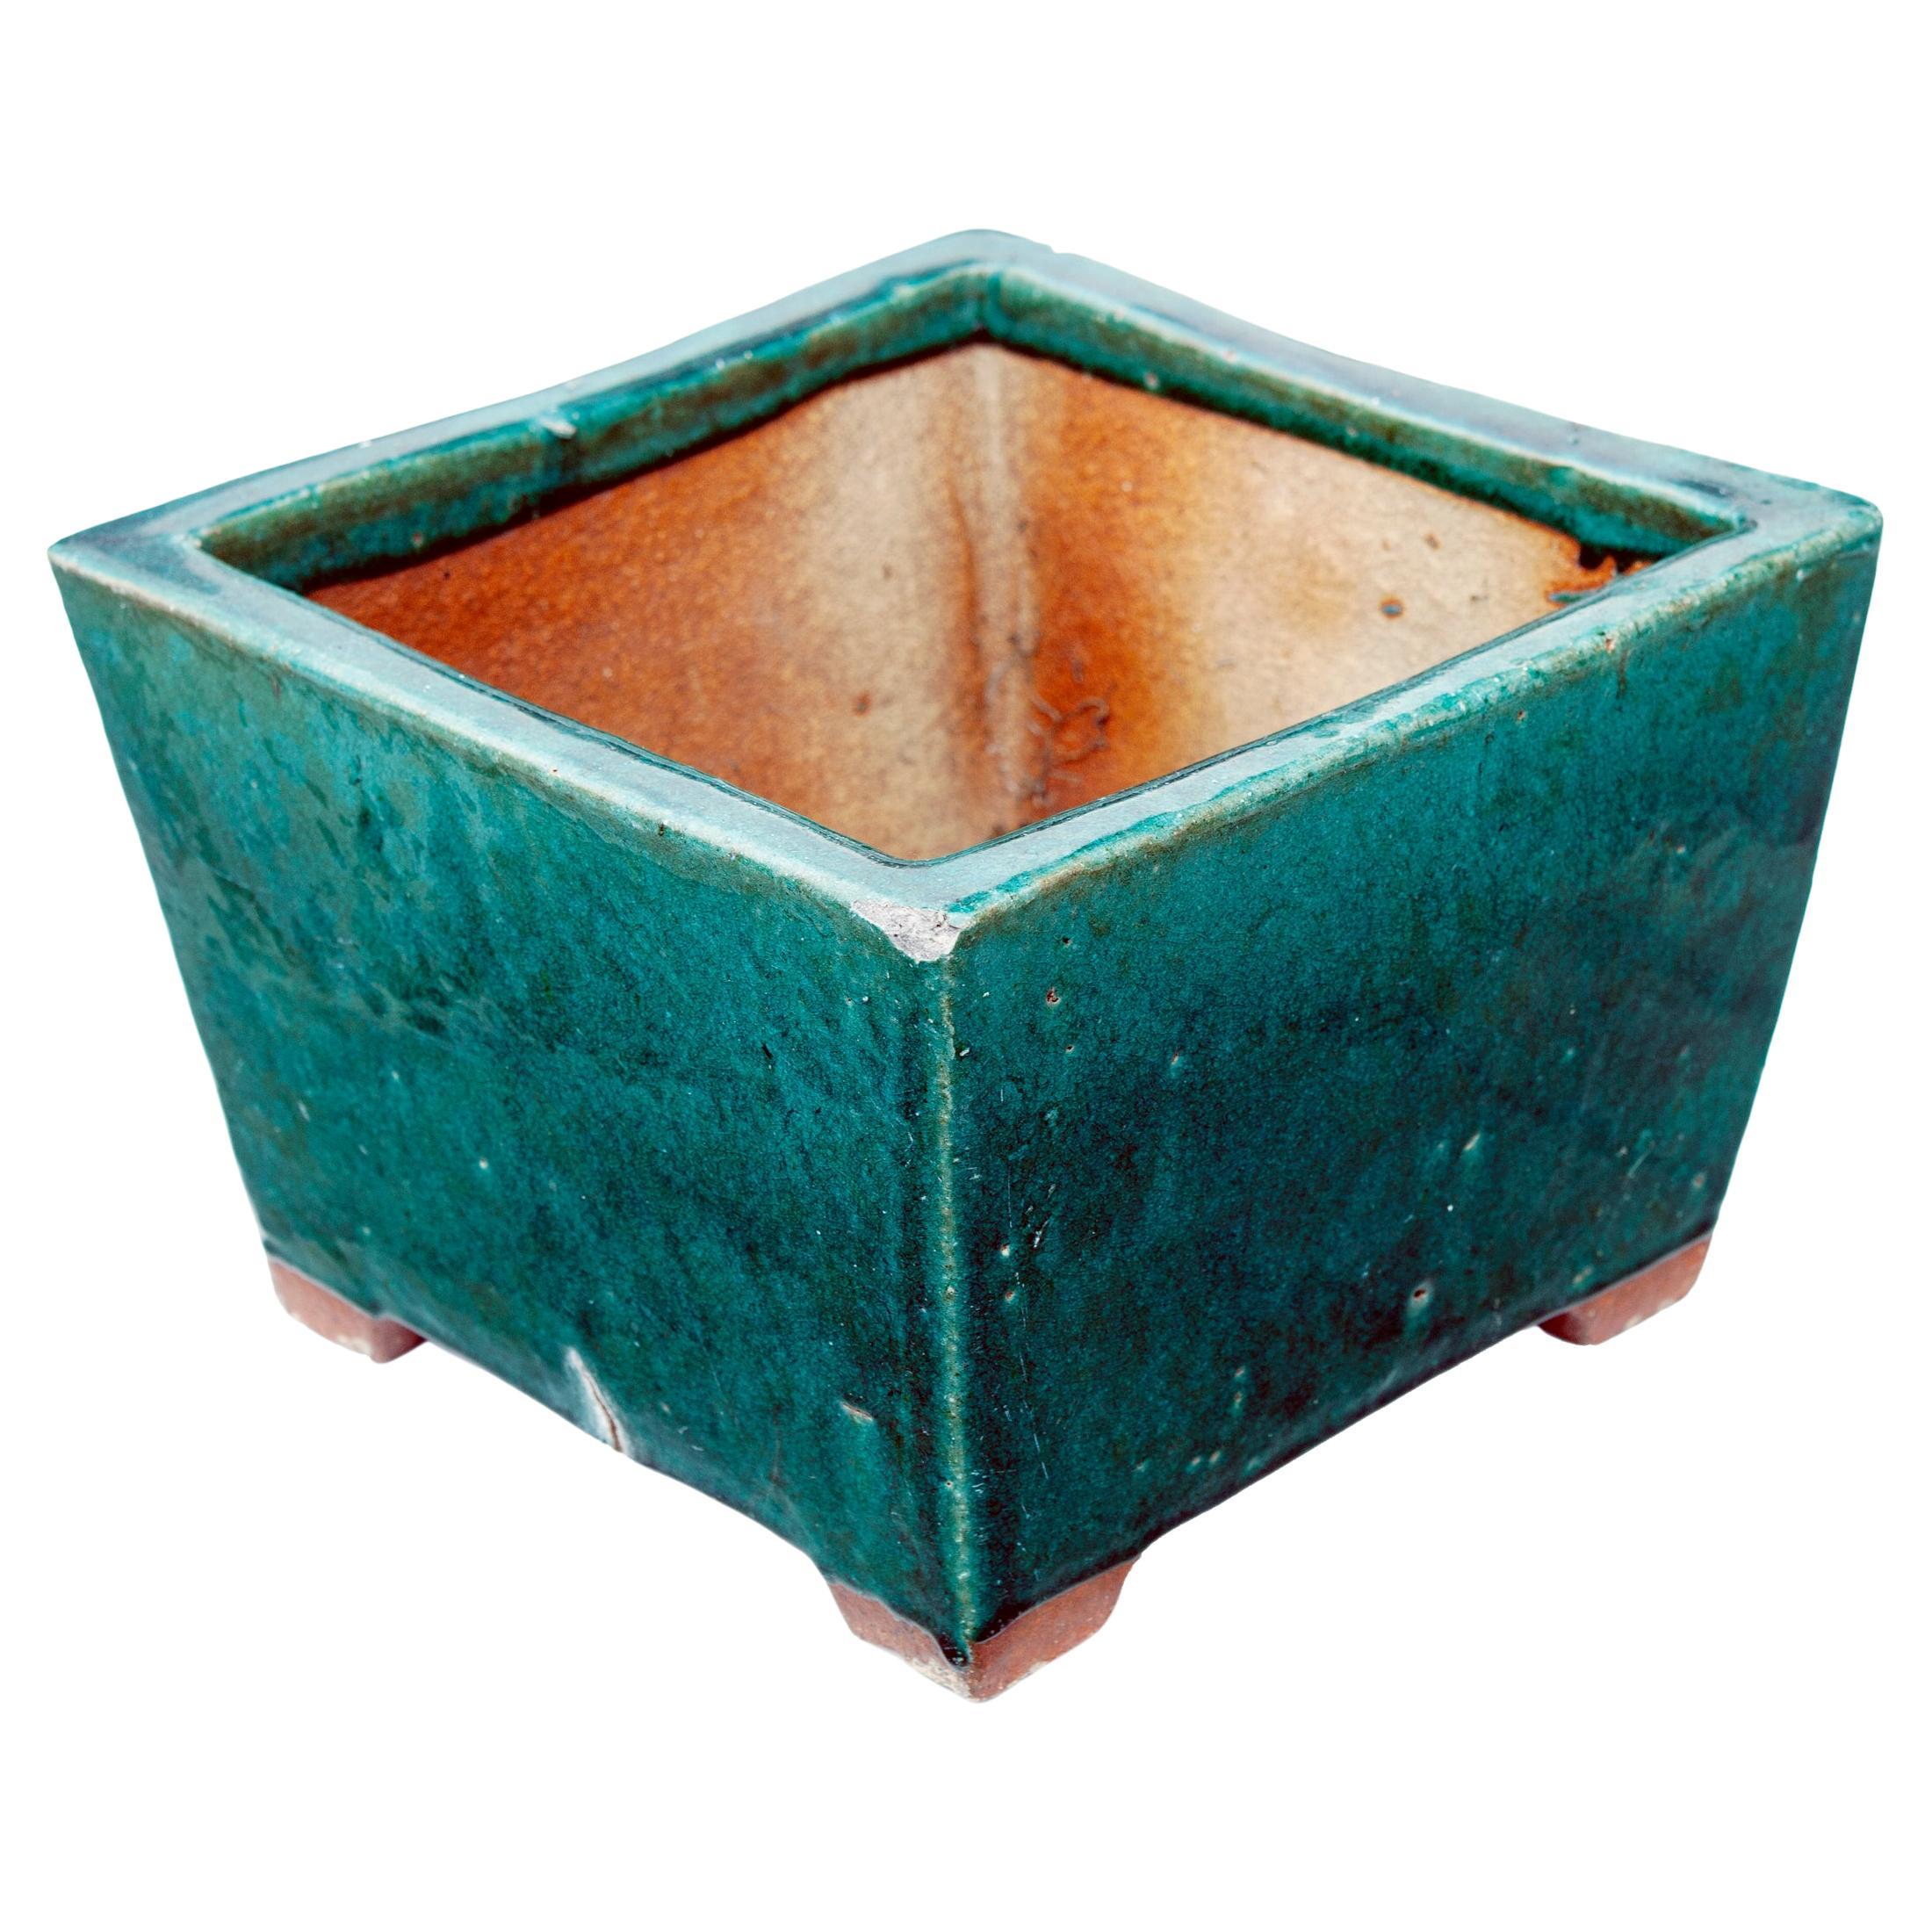 A vintage terracotta square planter with an emerald glazed finish. The planter is handmade with a dimpled texture, a unique and beautiful piece. The planter is unsigned, the square shape is perfect for displaying small plants or bonsai.
